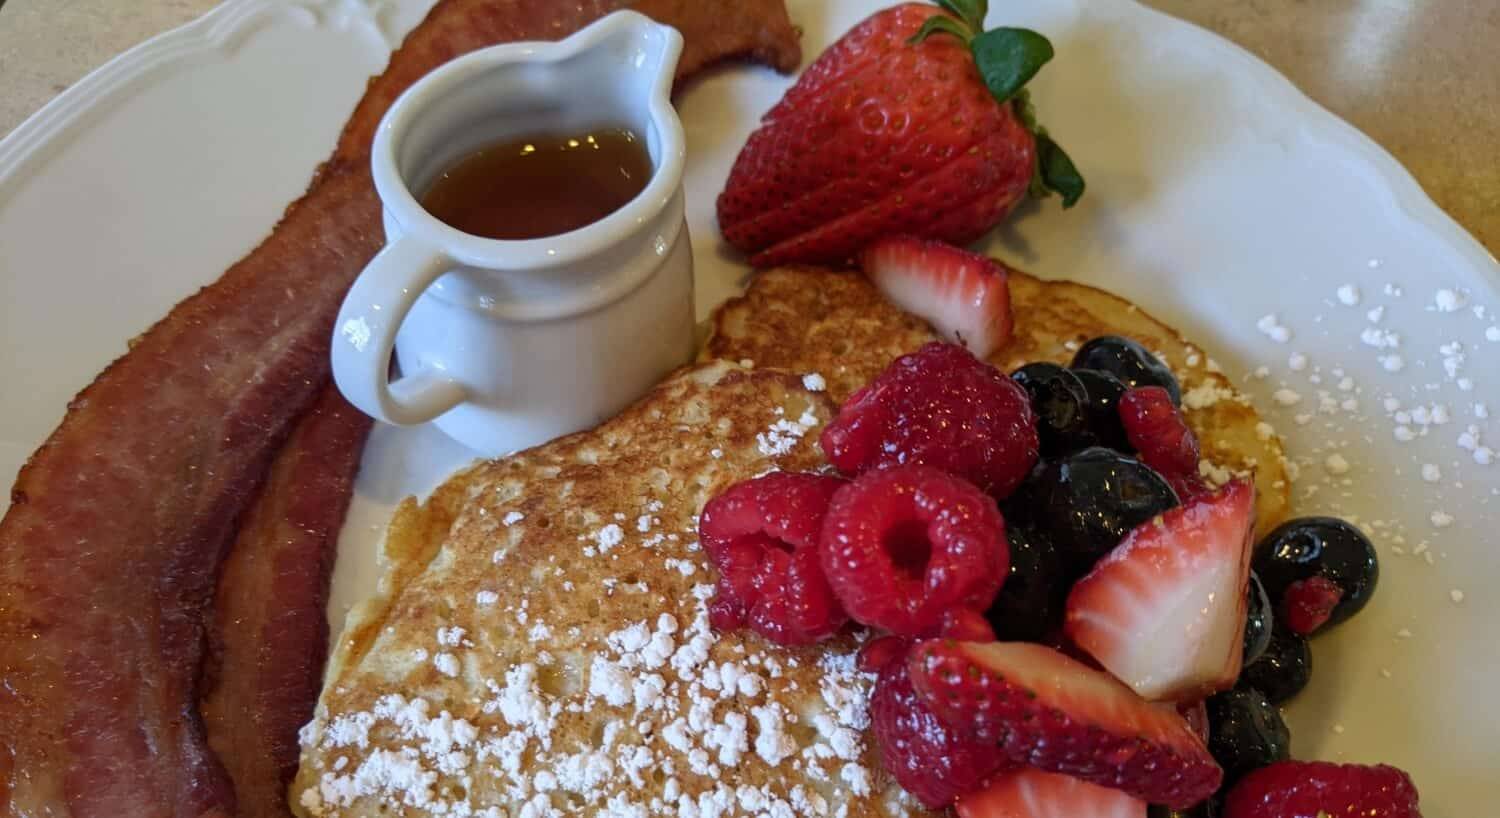 A plate with pancakes topped with fresh berries, 2 pieces of bacon, and a small pitcher of maple syrup.